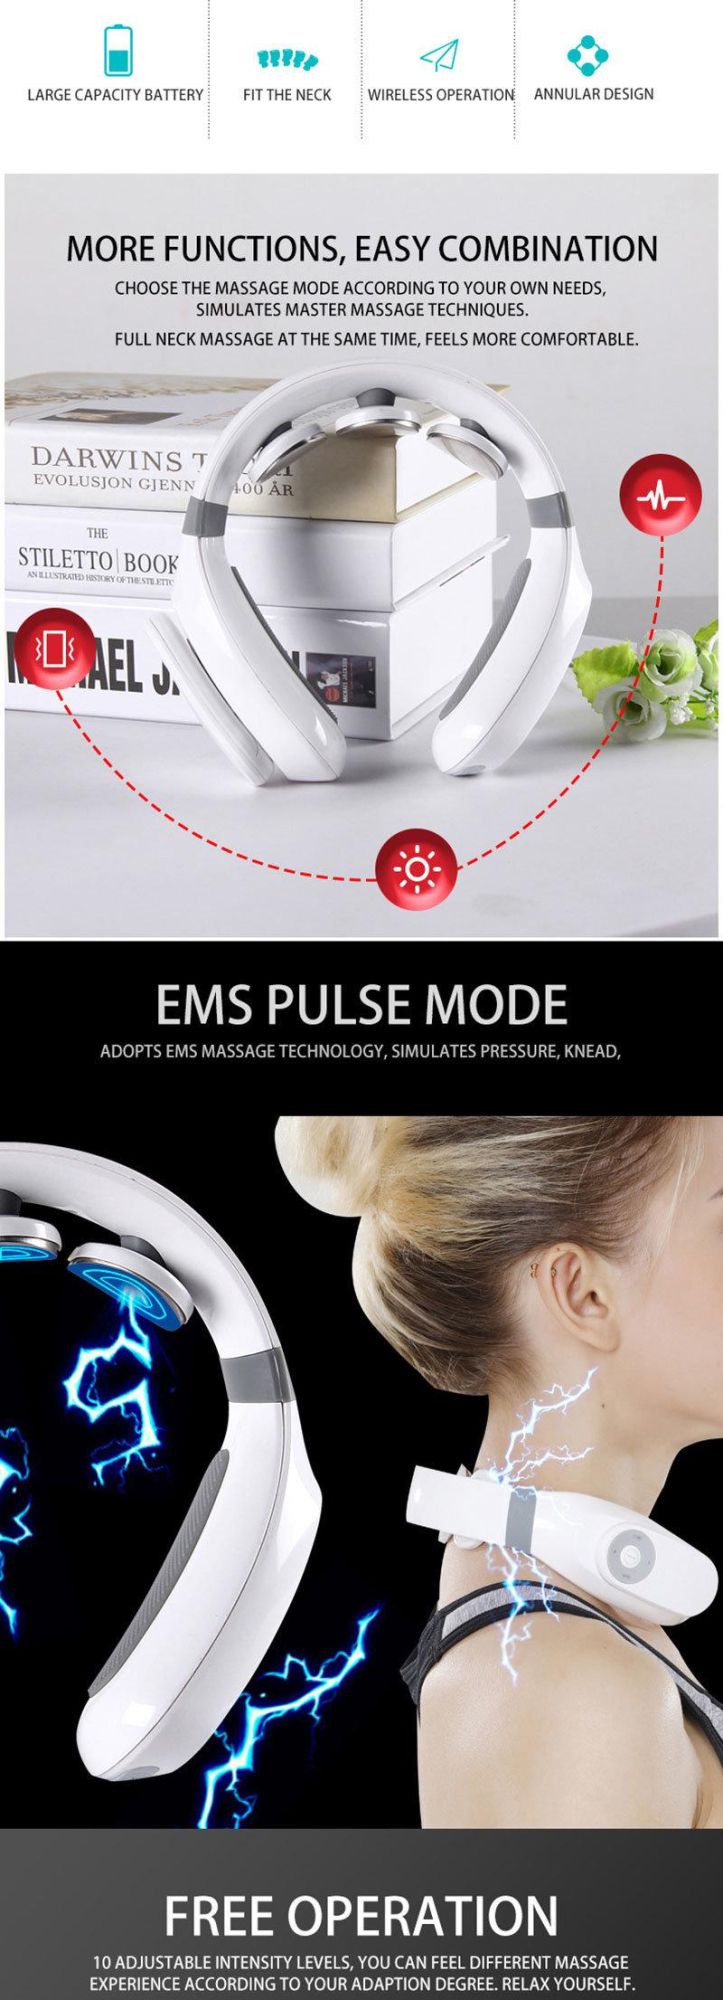 Home Electric Pulse Massage Product Tool Remote Control Neck Massager for Physical Therapy Pain Relief Massage Equipment